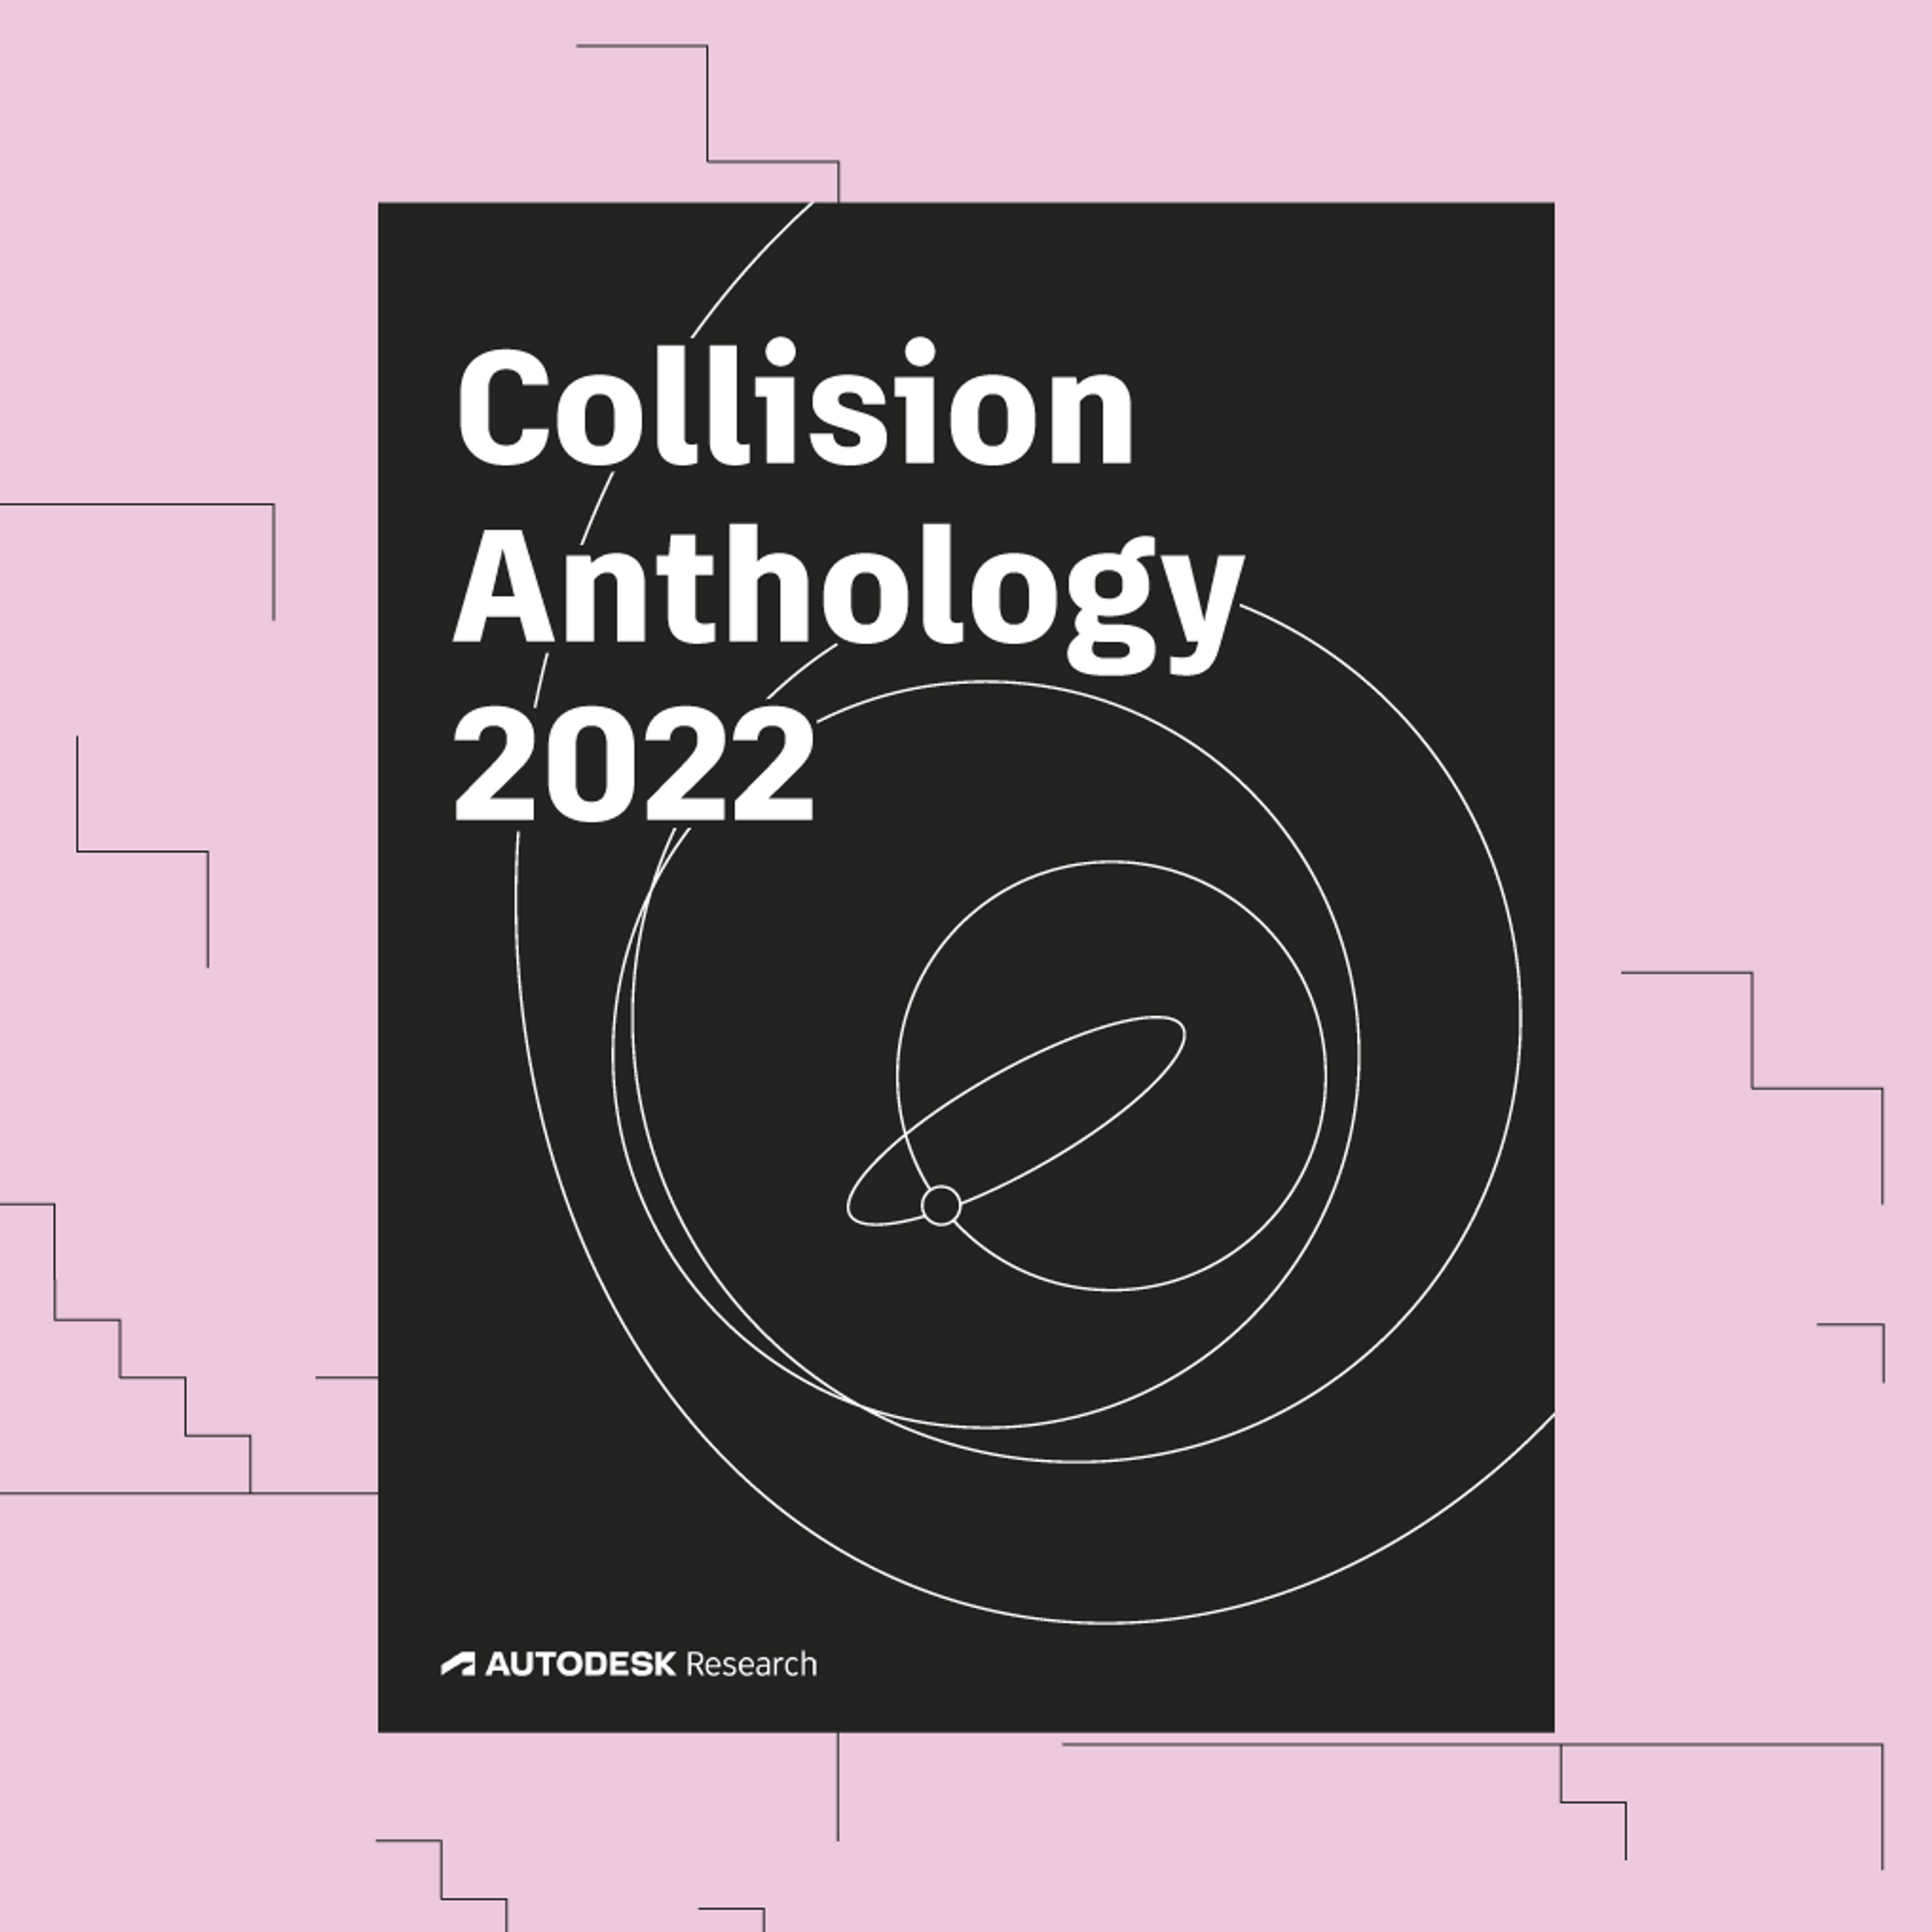 The front cover of the Collision Anthology